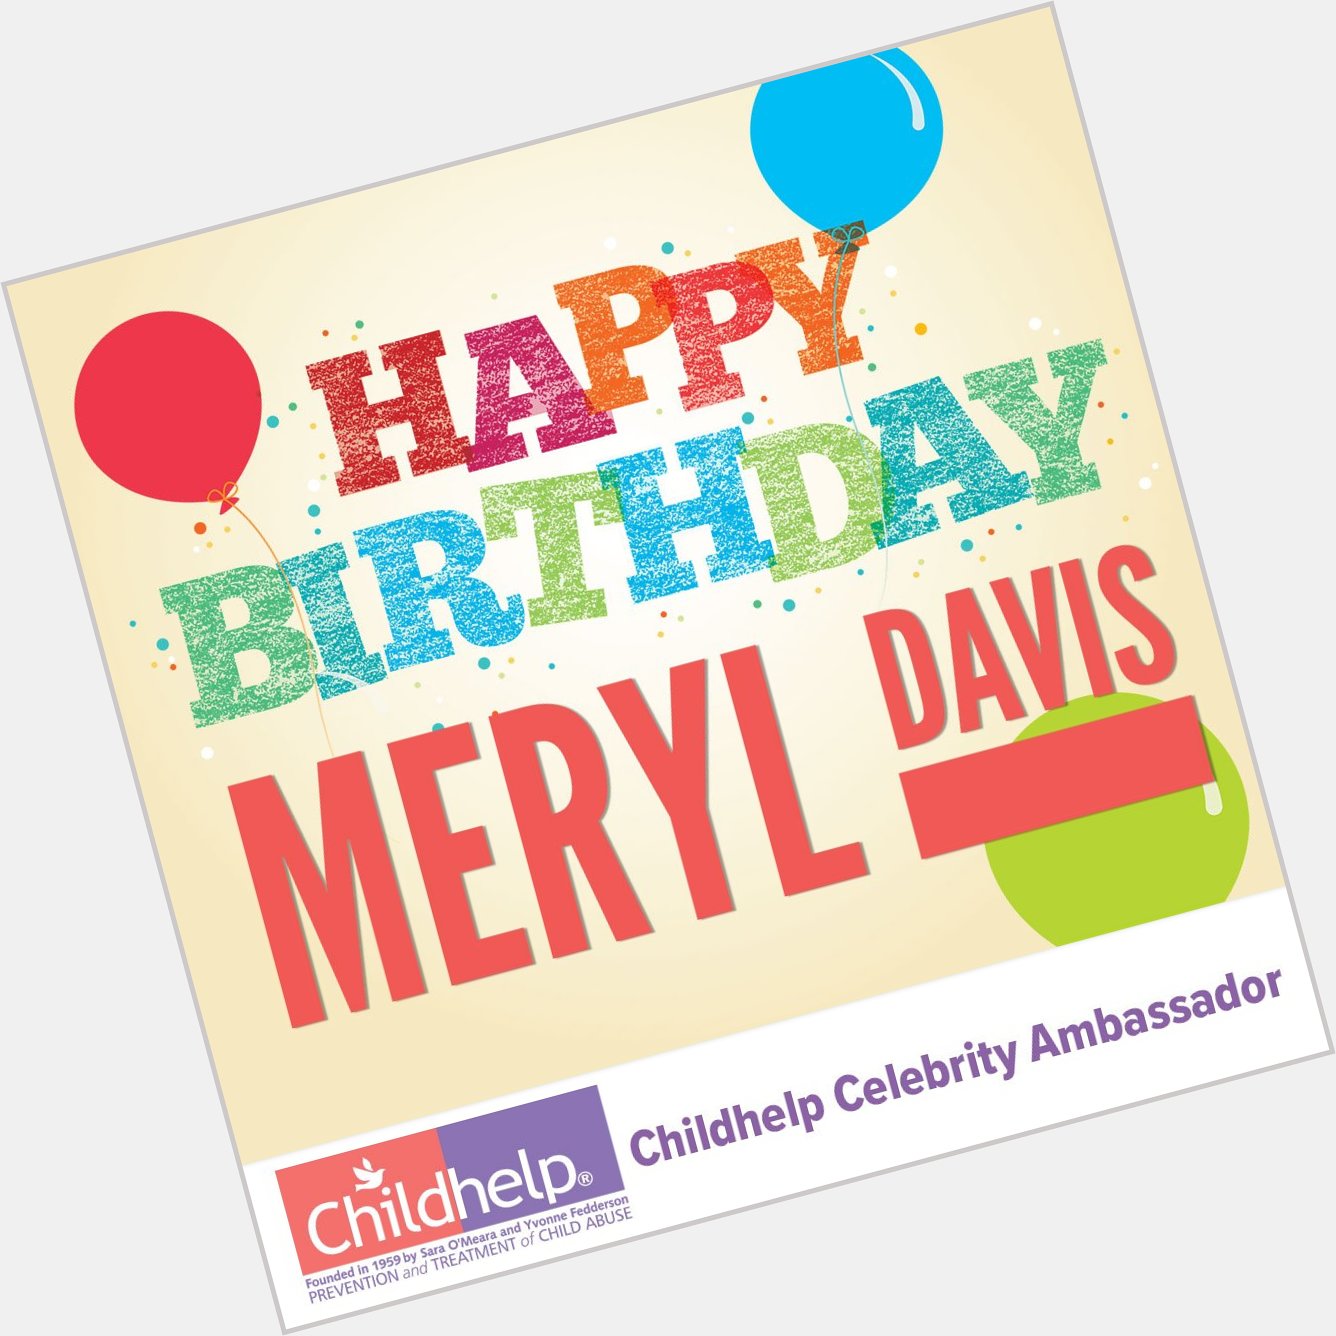 Happy Birthday to Childhelp Celebrity Ambassador Have a great day! 